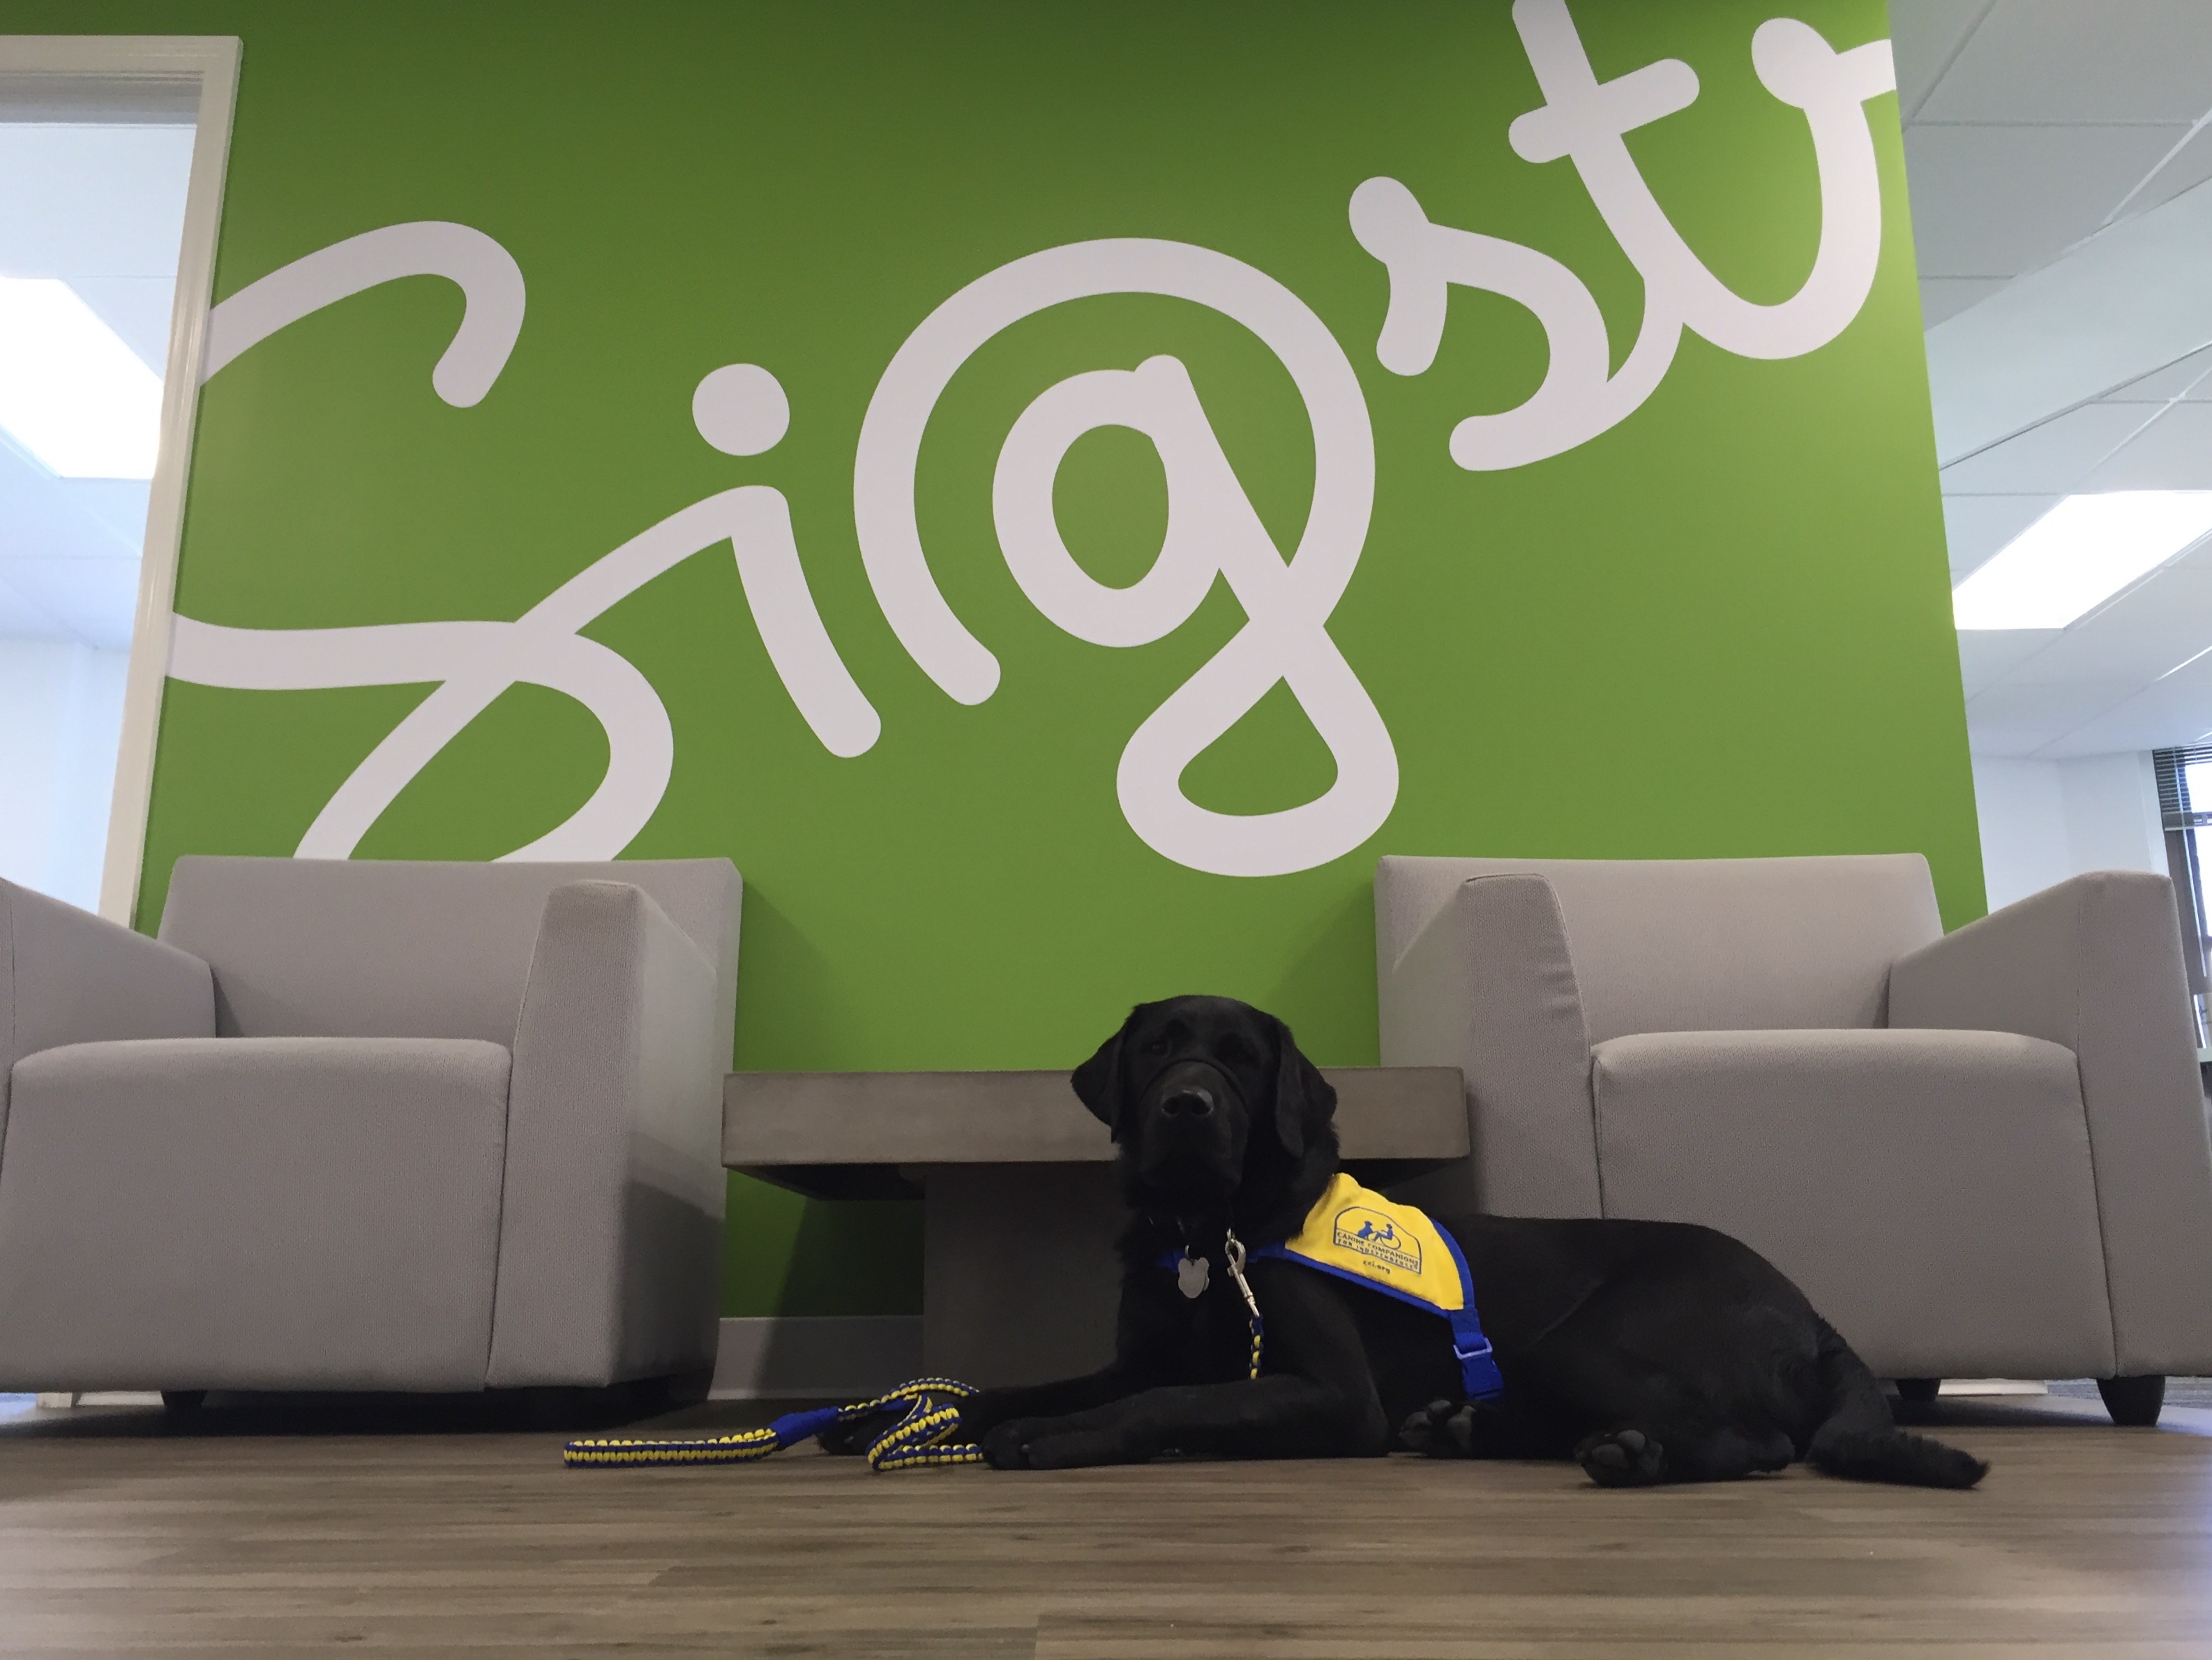 Email signature editor Sigstr office visitor